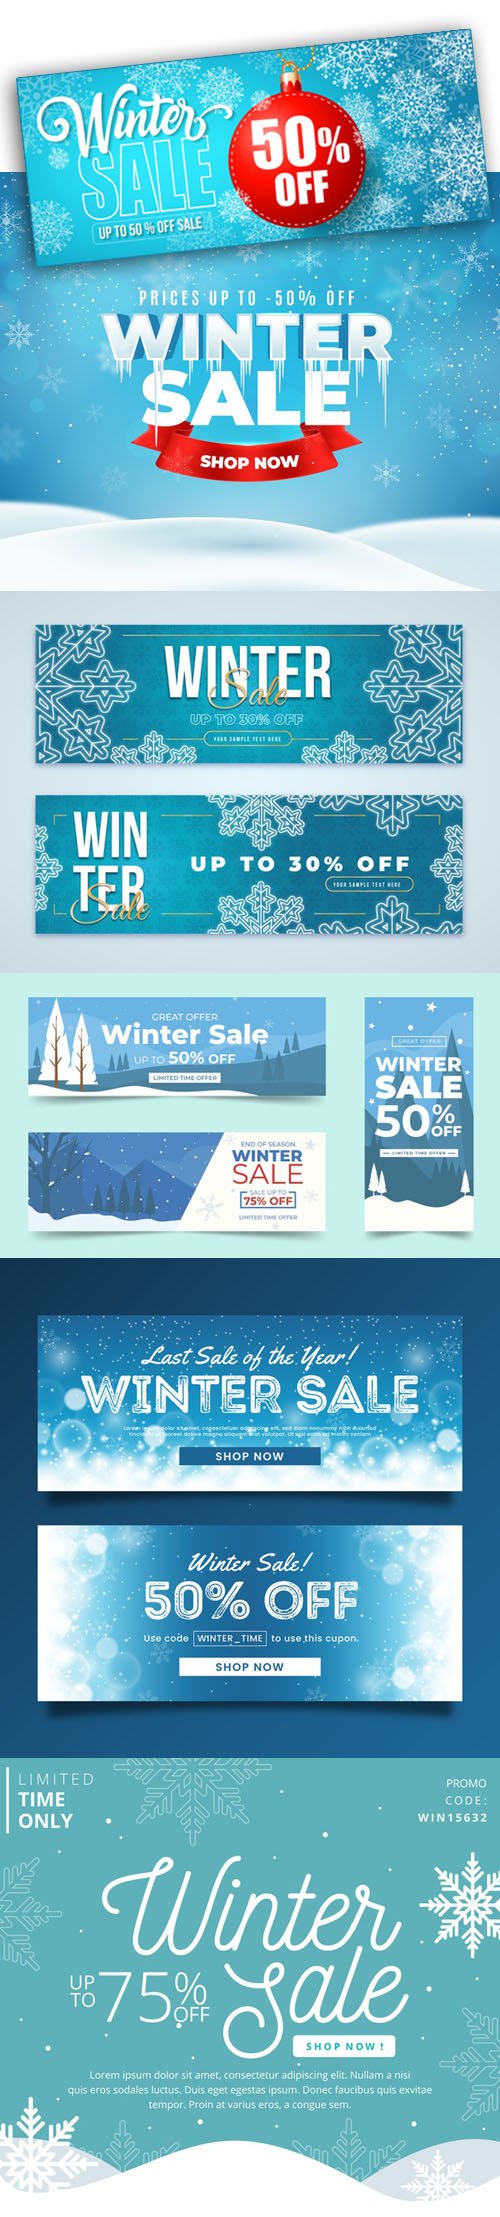 Winter Sales Banners Vector Collection 4